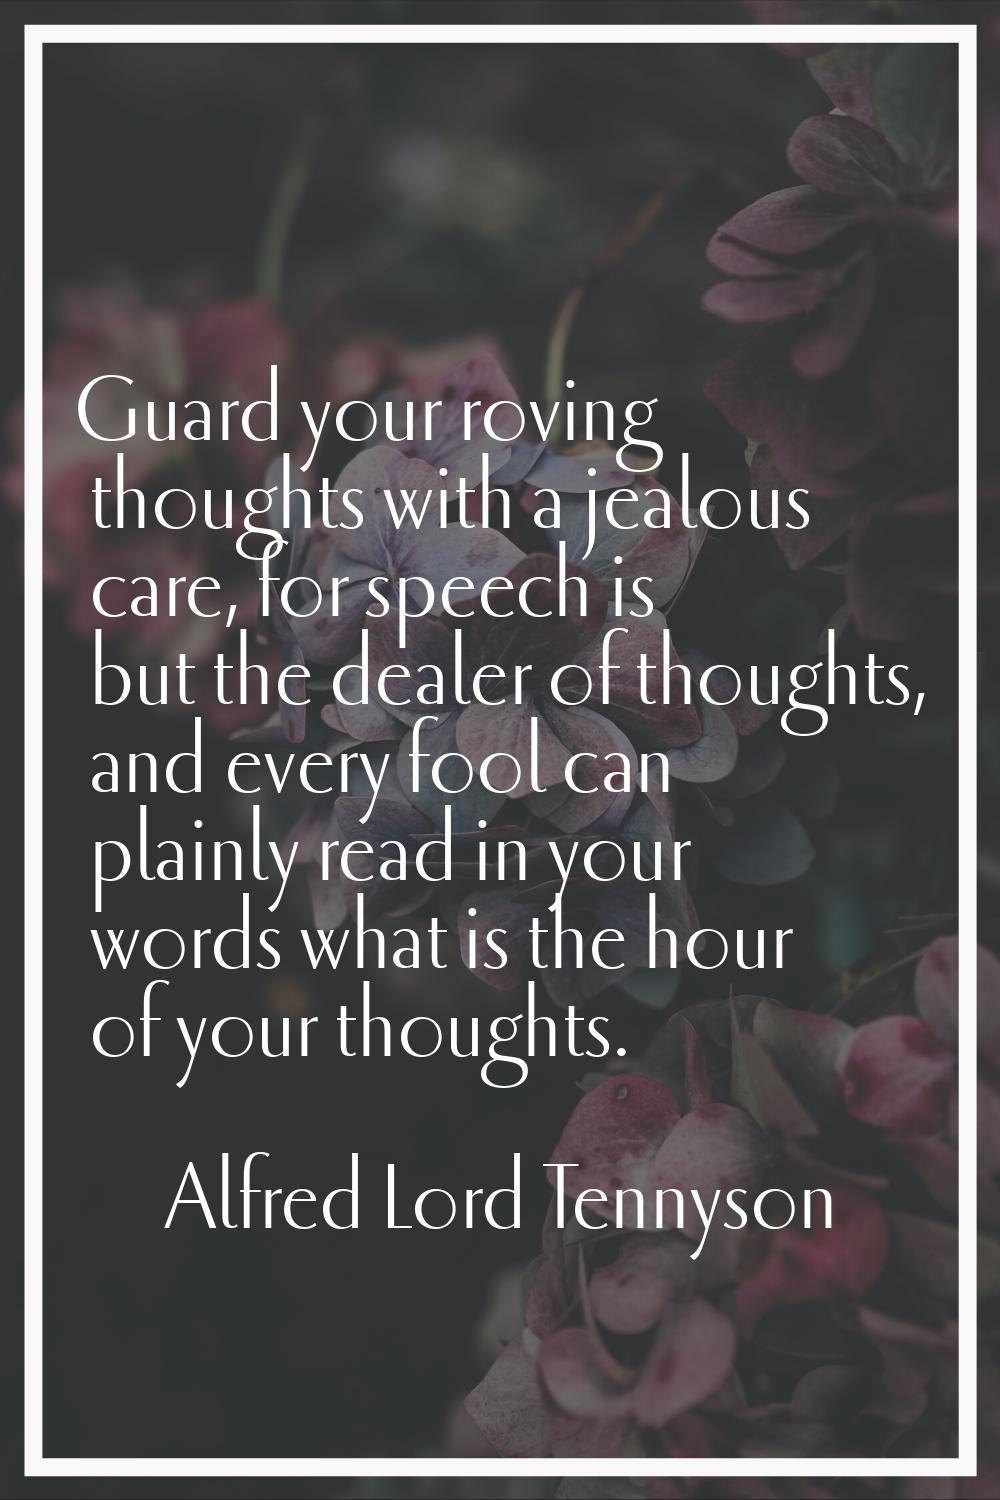 Guard your roving thoughts with a jealous care, for speech is but the dealer of thoughts, and every